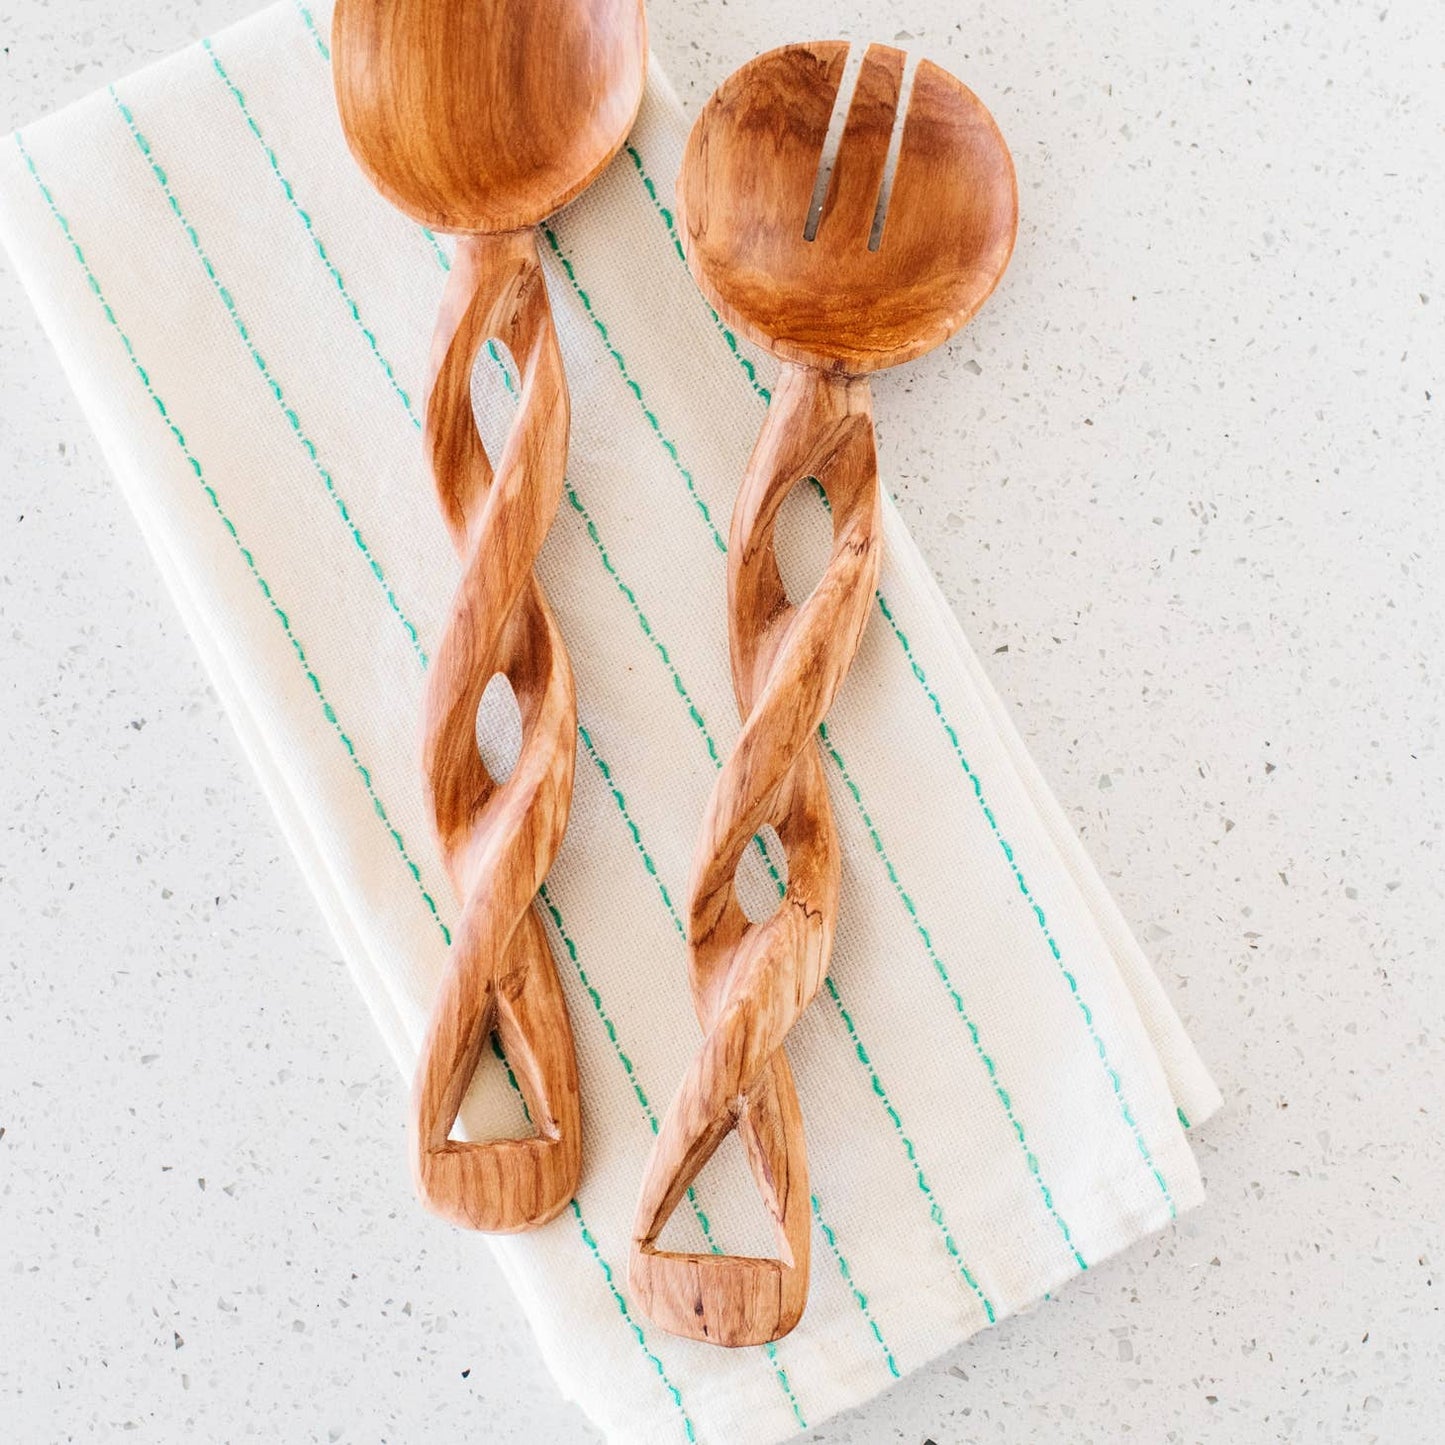 These twisted serving spoons are perfect for salads & are delicately carved from durable olive wood. Wild olivewood has a rich grain and is indigenous to East Africa.   Ethically made in Kenya.